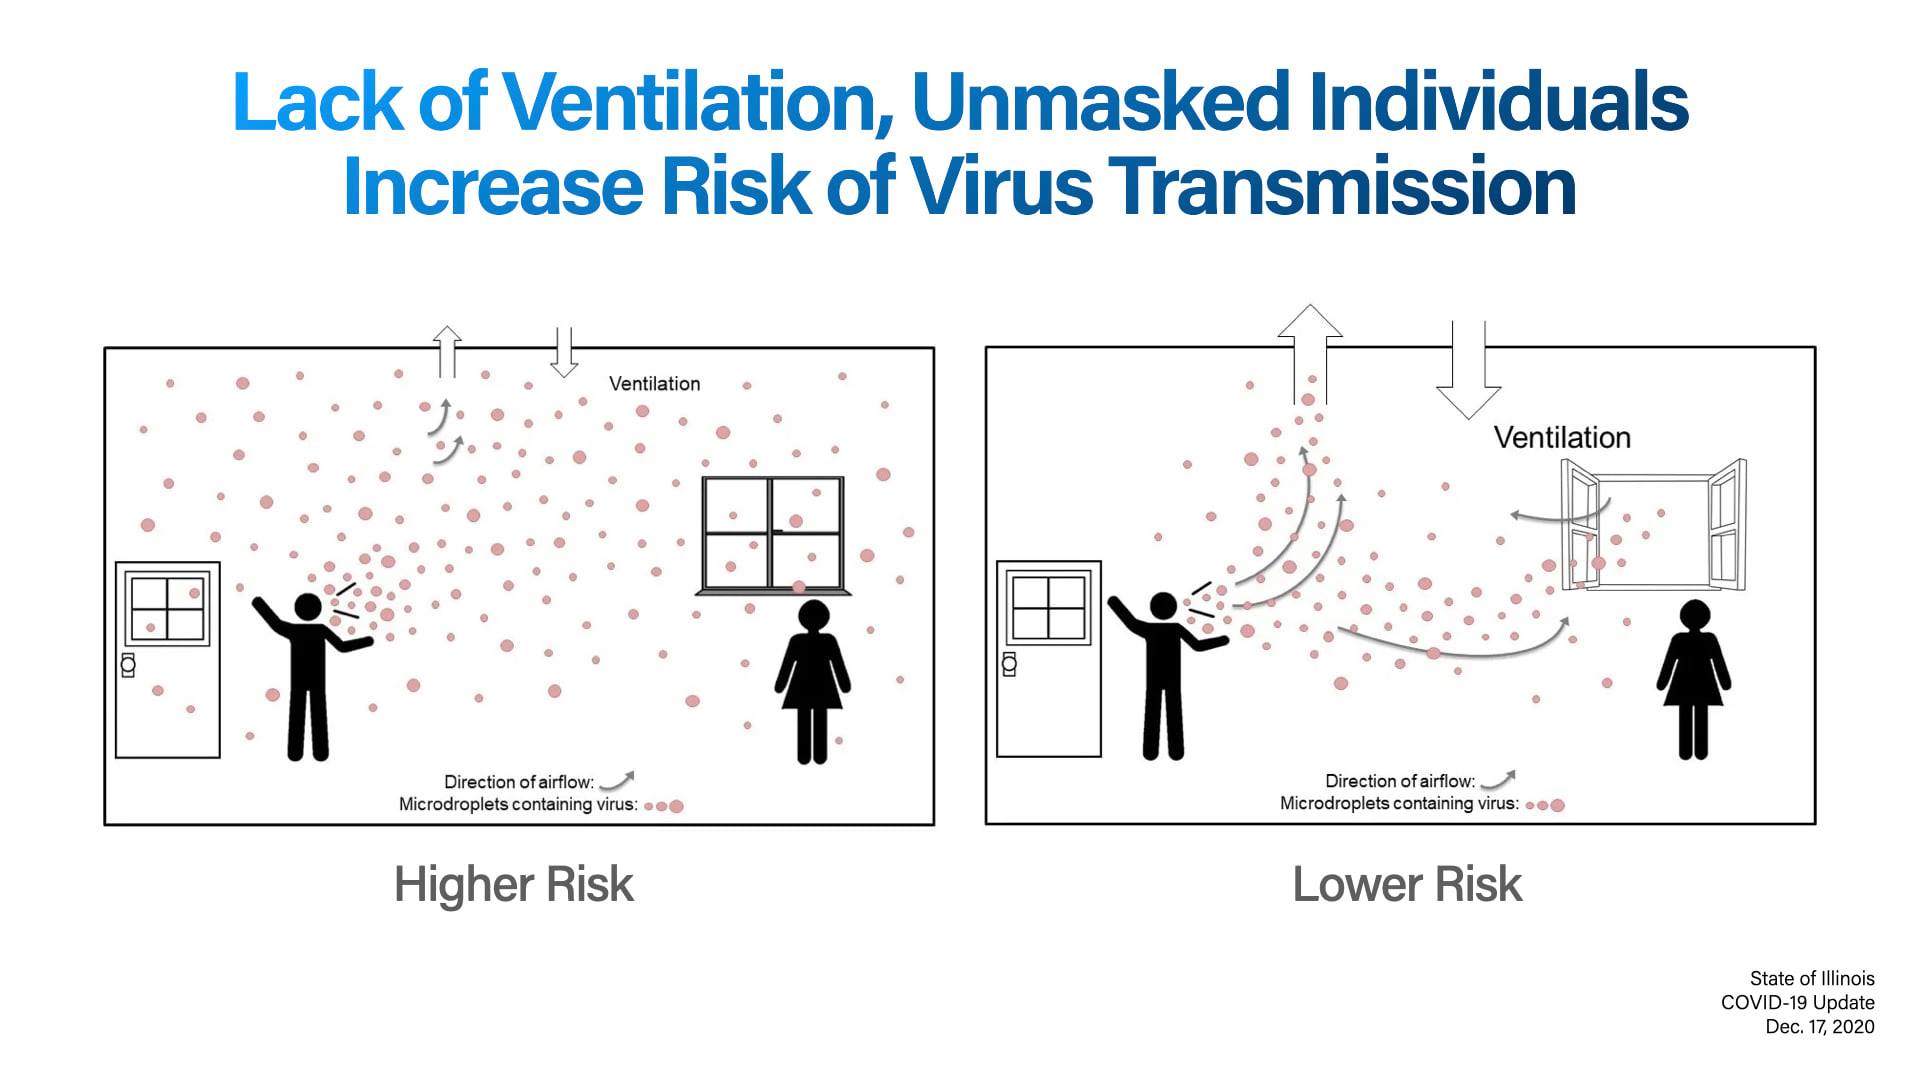 The greatest risk for spreading the virus comes when people gather indoors with limited airflow. 